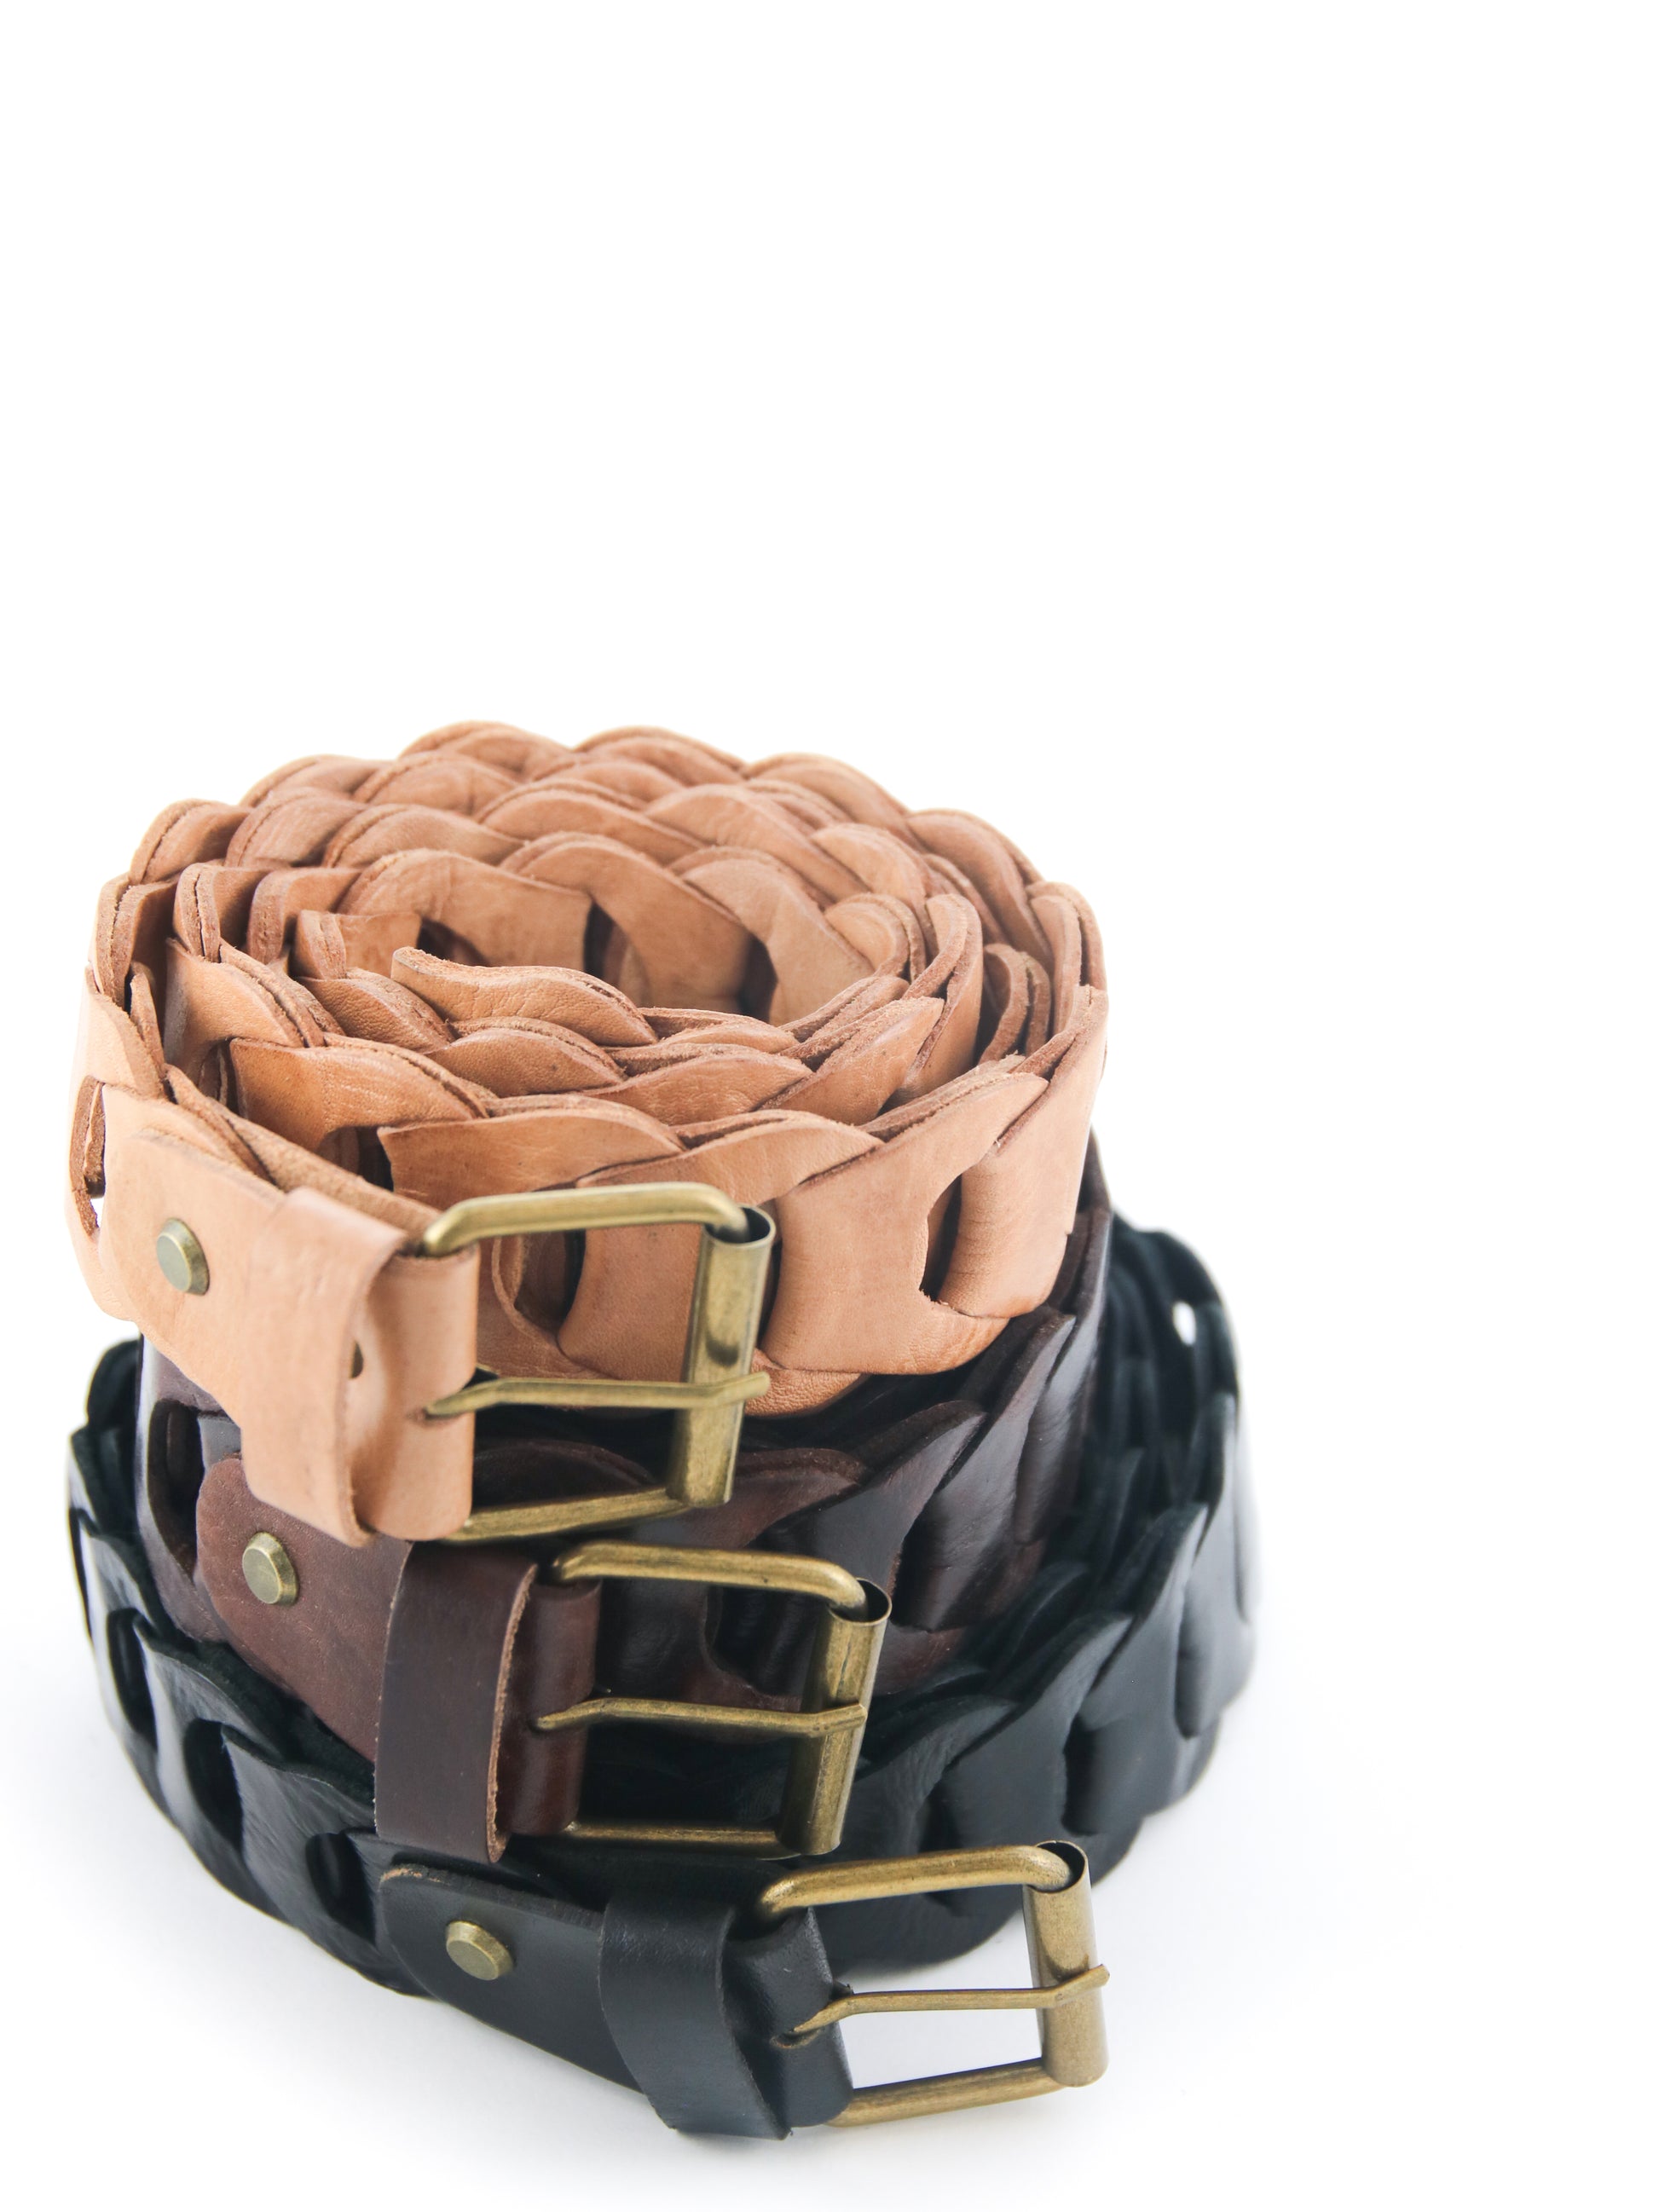 A collection of tfa leather chain link belts